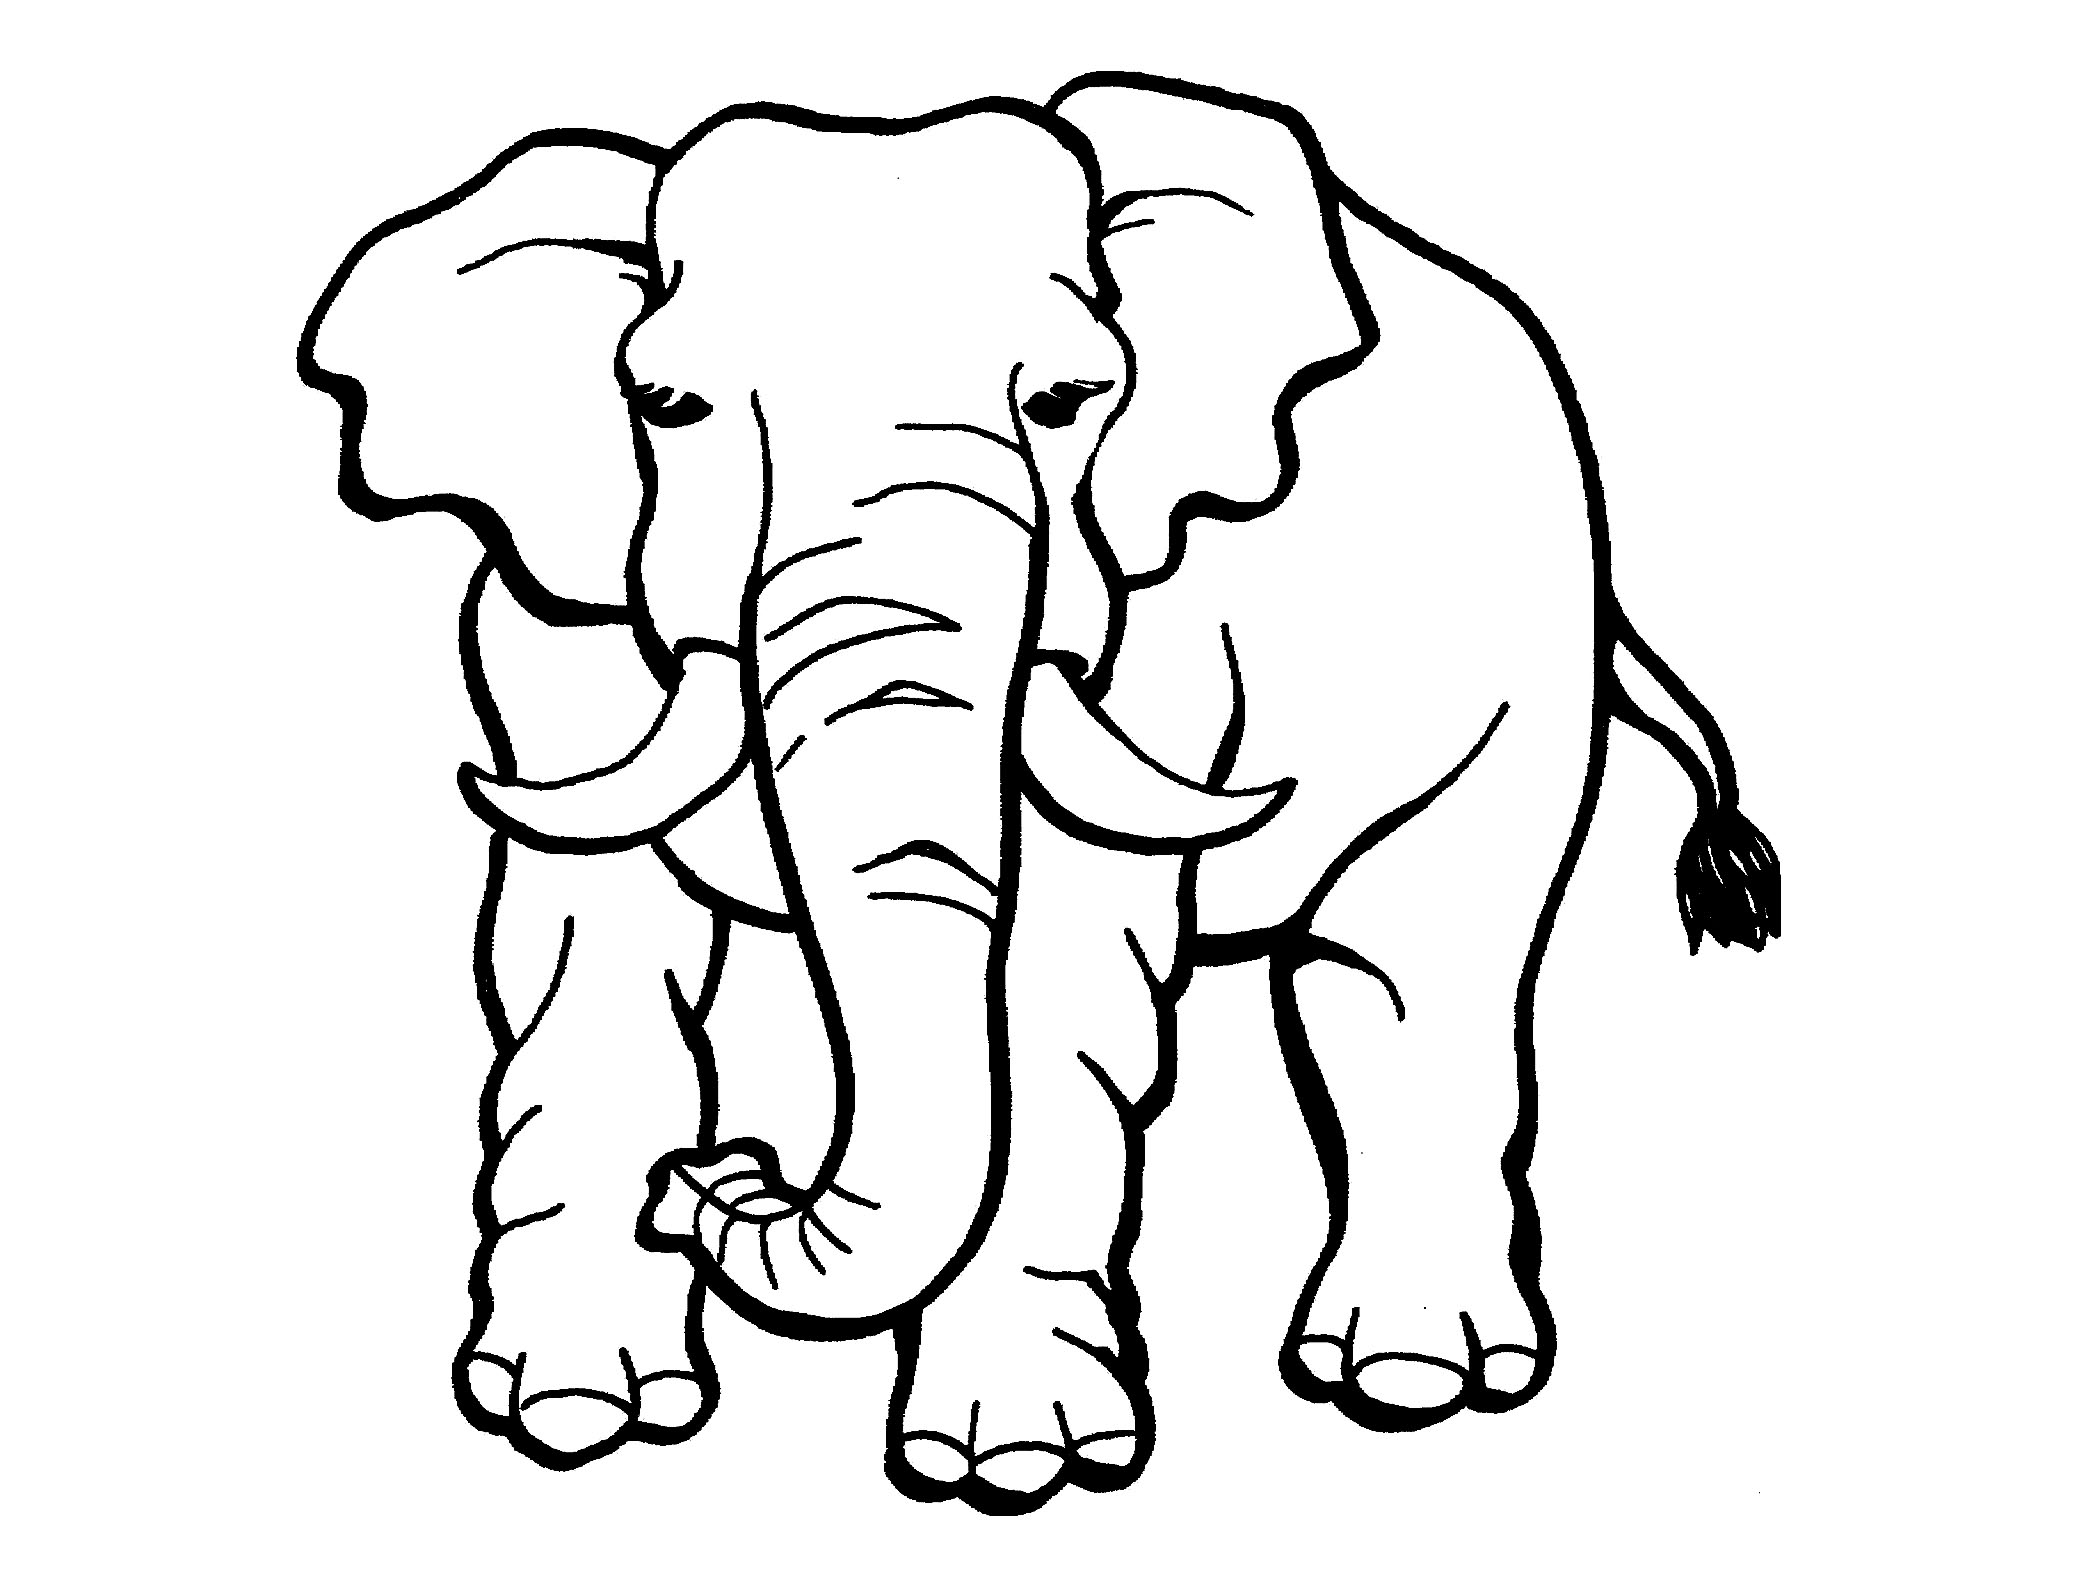 Download Elephants To Print For Free Elephants Kids Coloring Pages